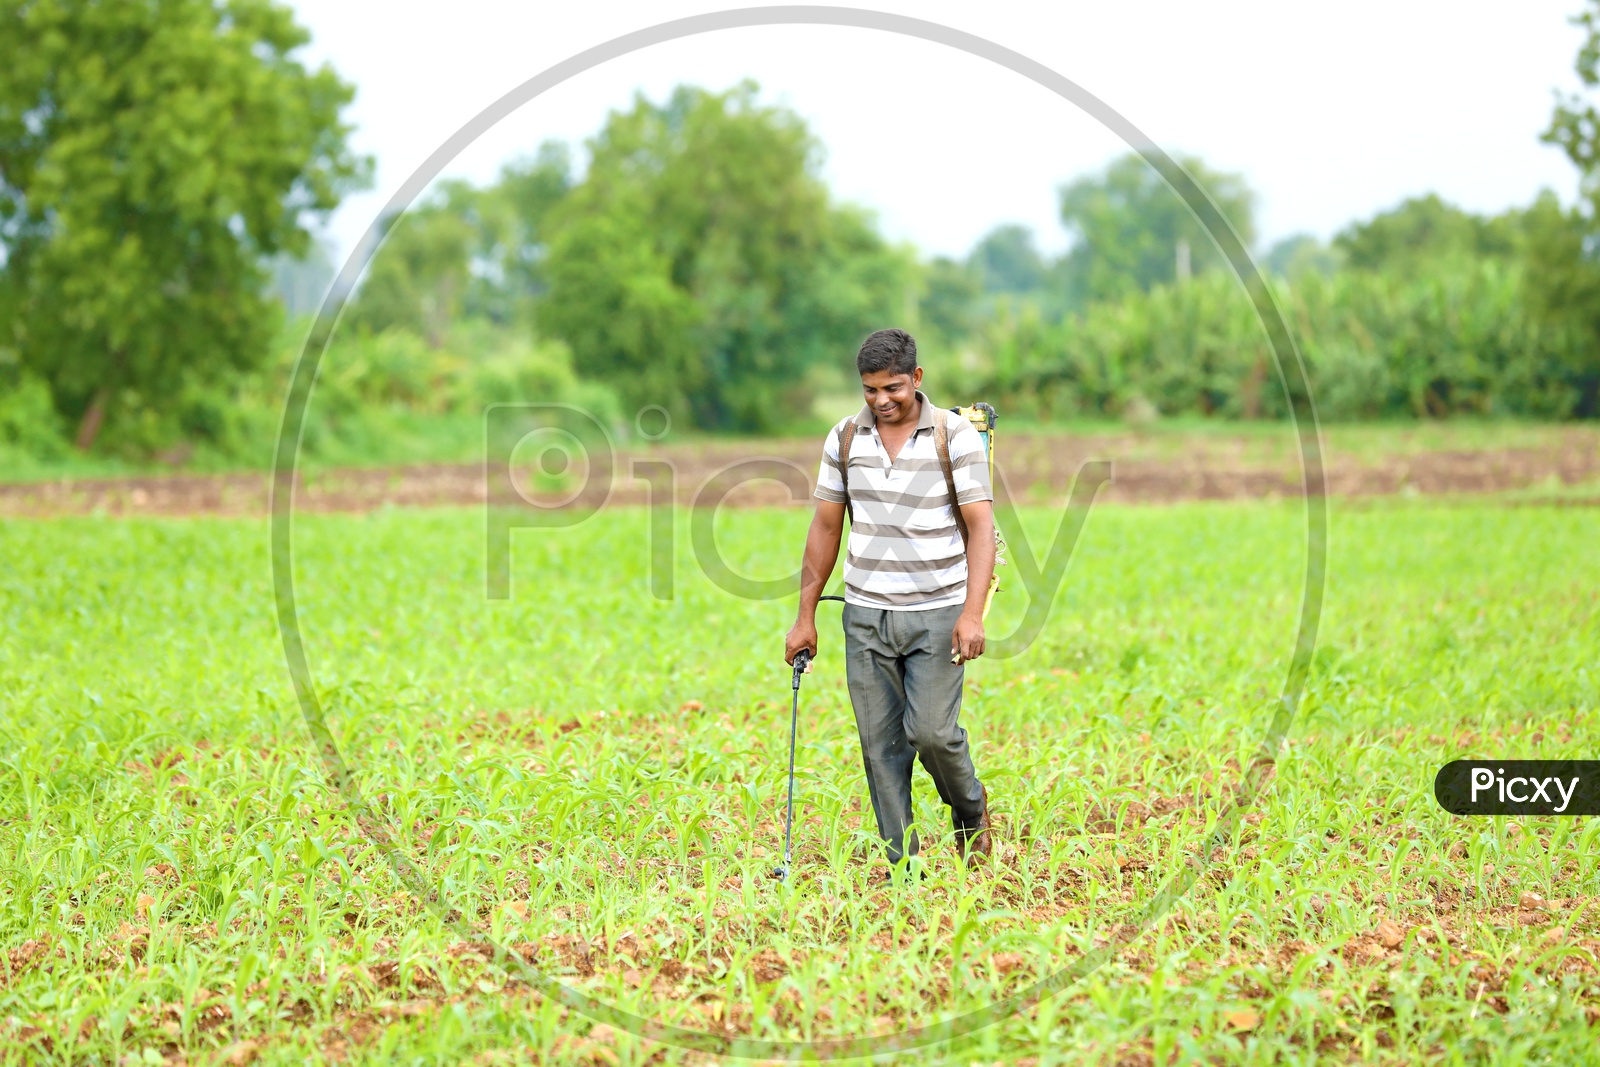 Farmer Spraying Pesticide at Agriculture Fields with smiling face